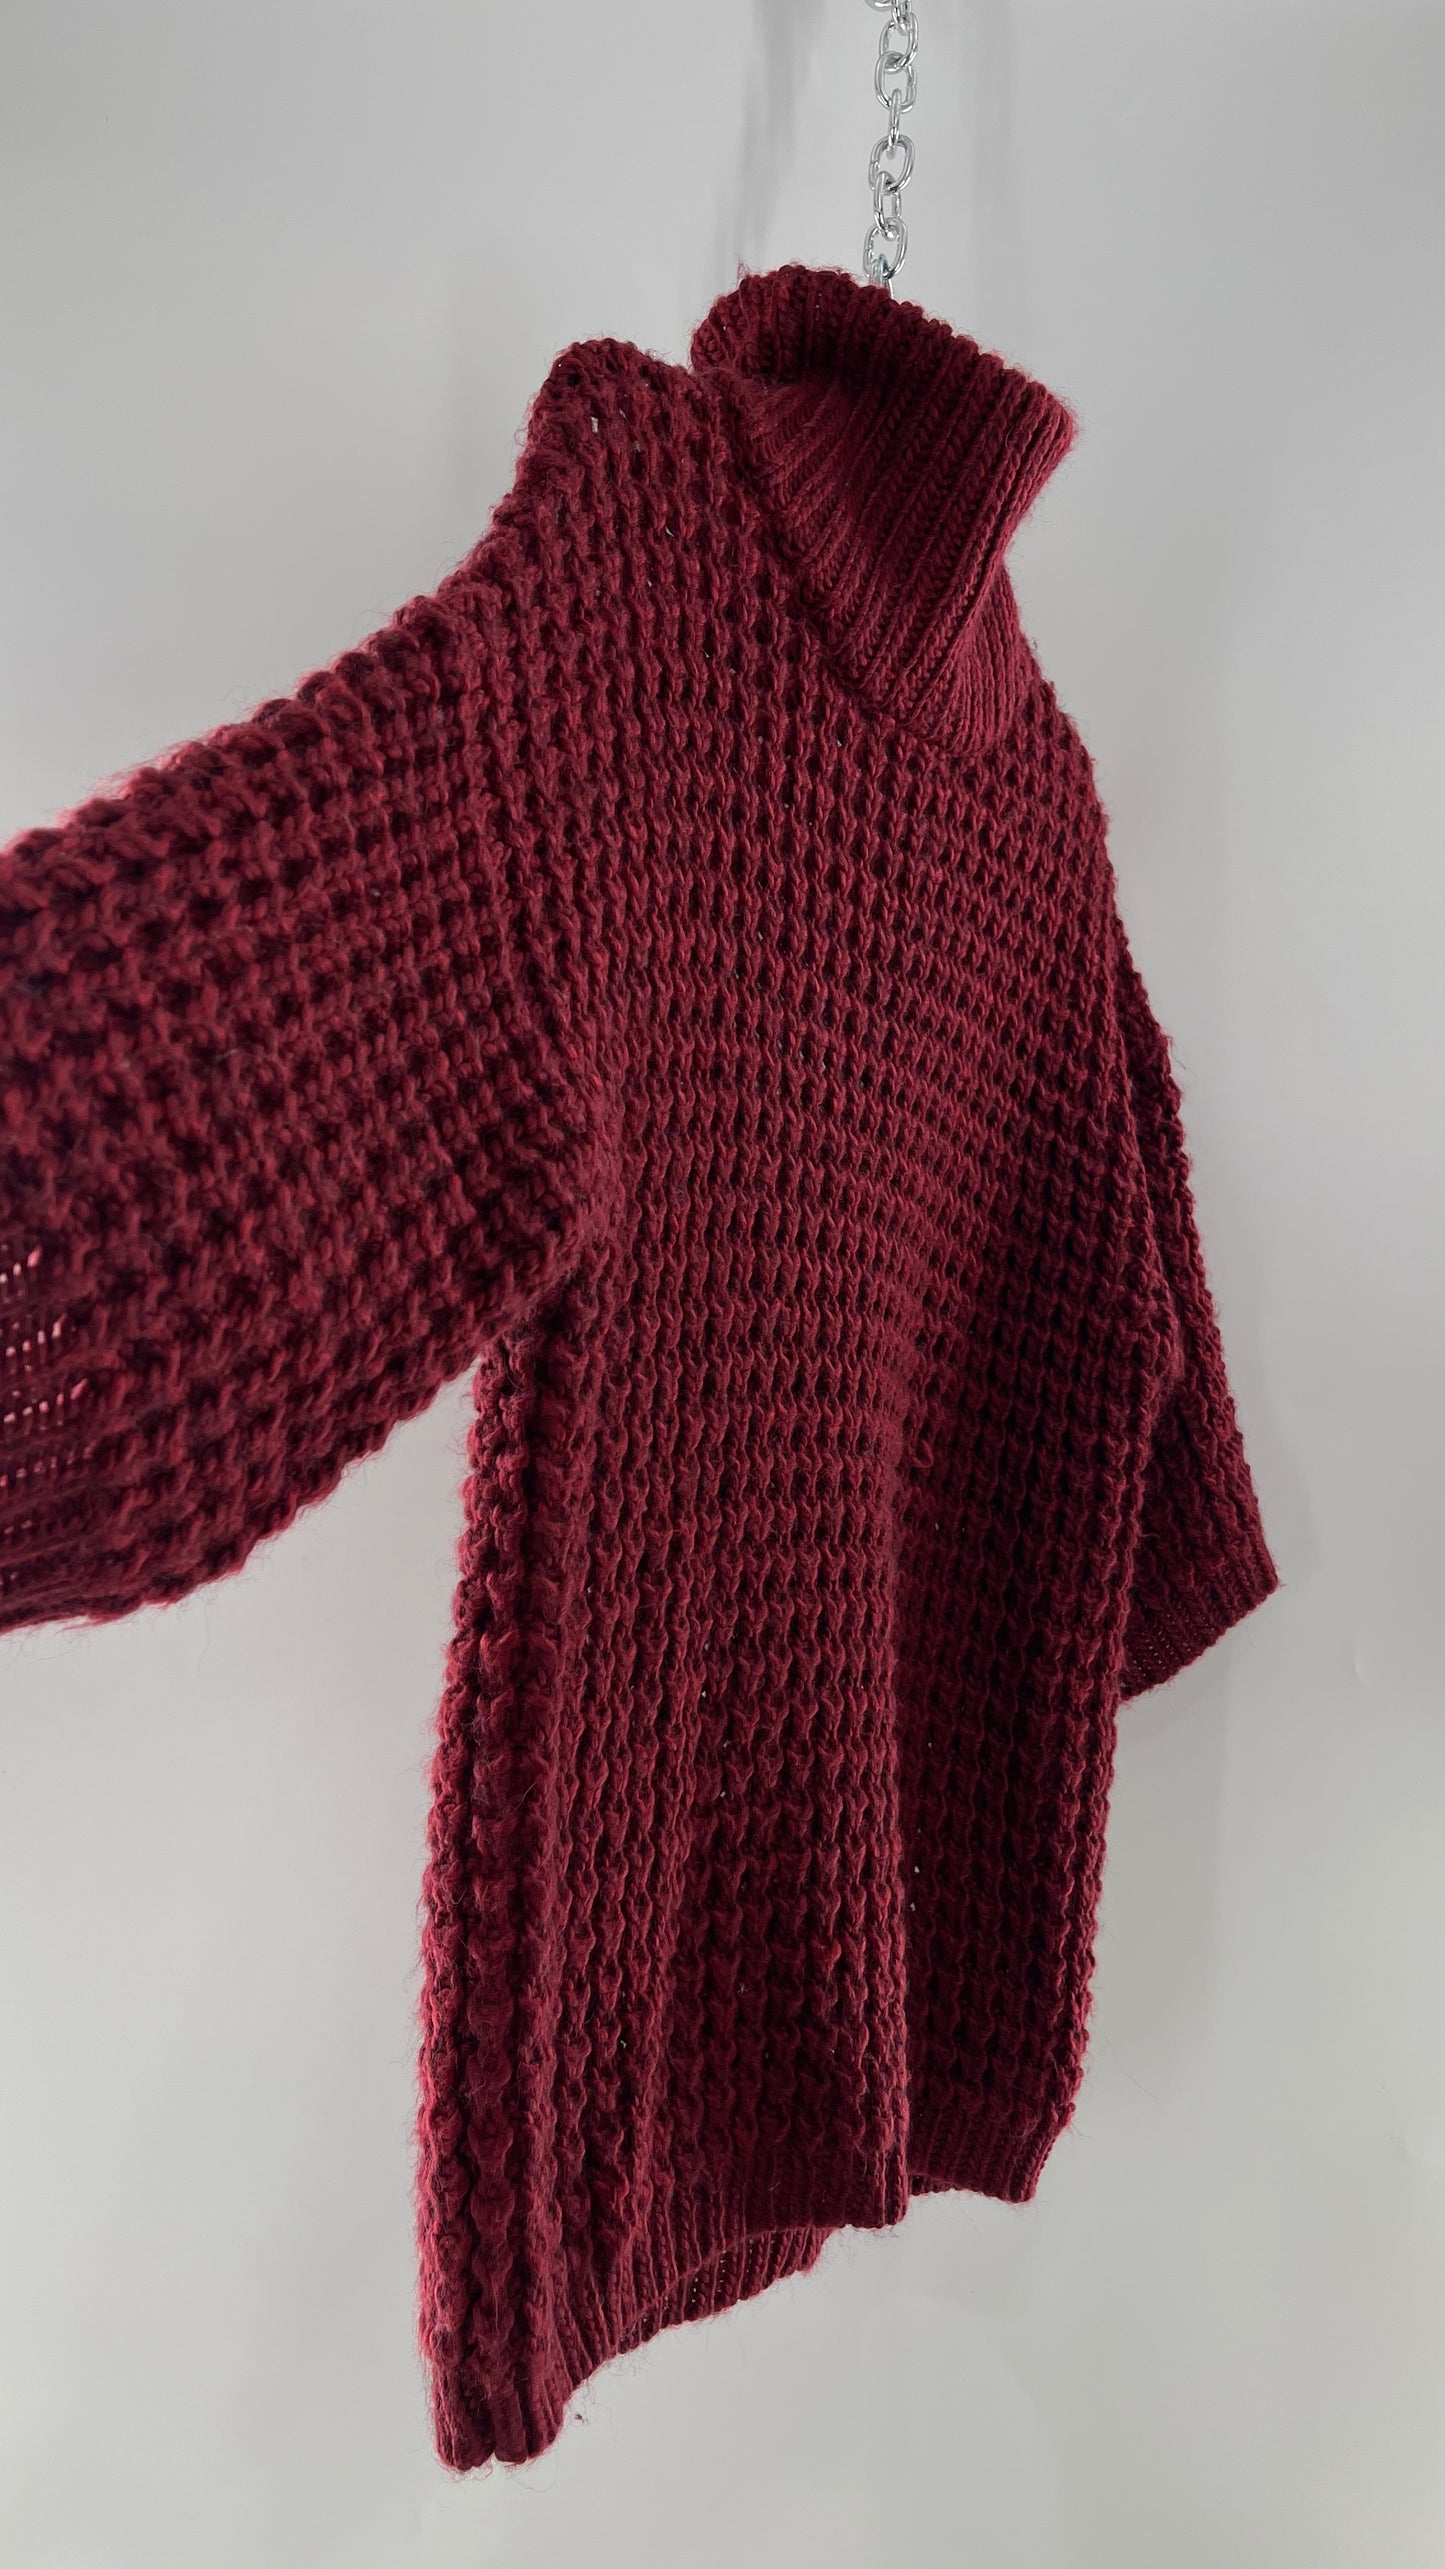 Anthropologie Thick Knit Burgundy/Maroon Short Sleeve Slouchy Turtle/Mock Neck Sweater (Large)